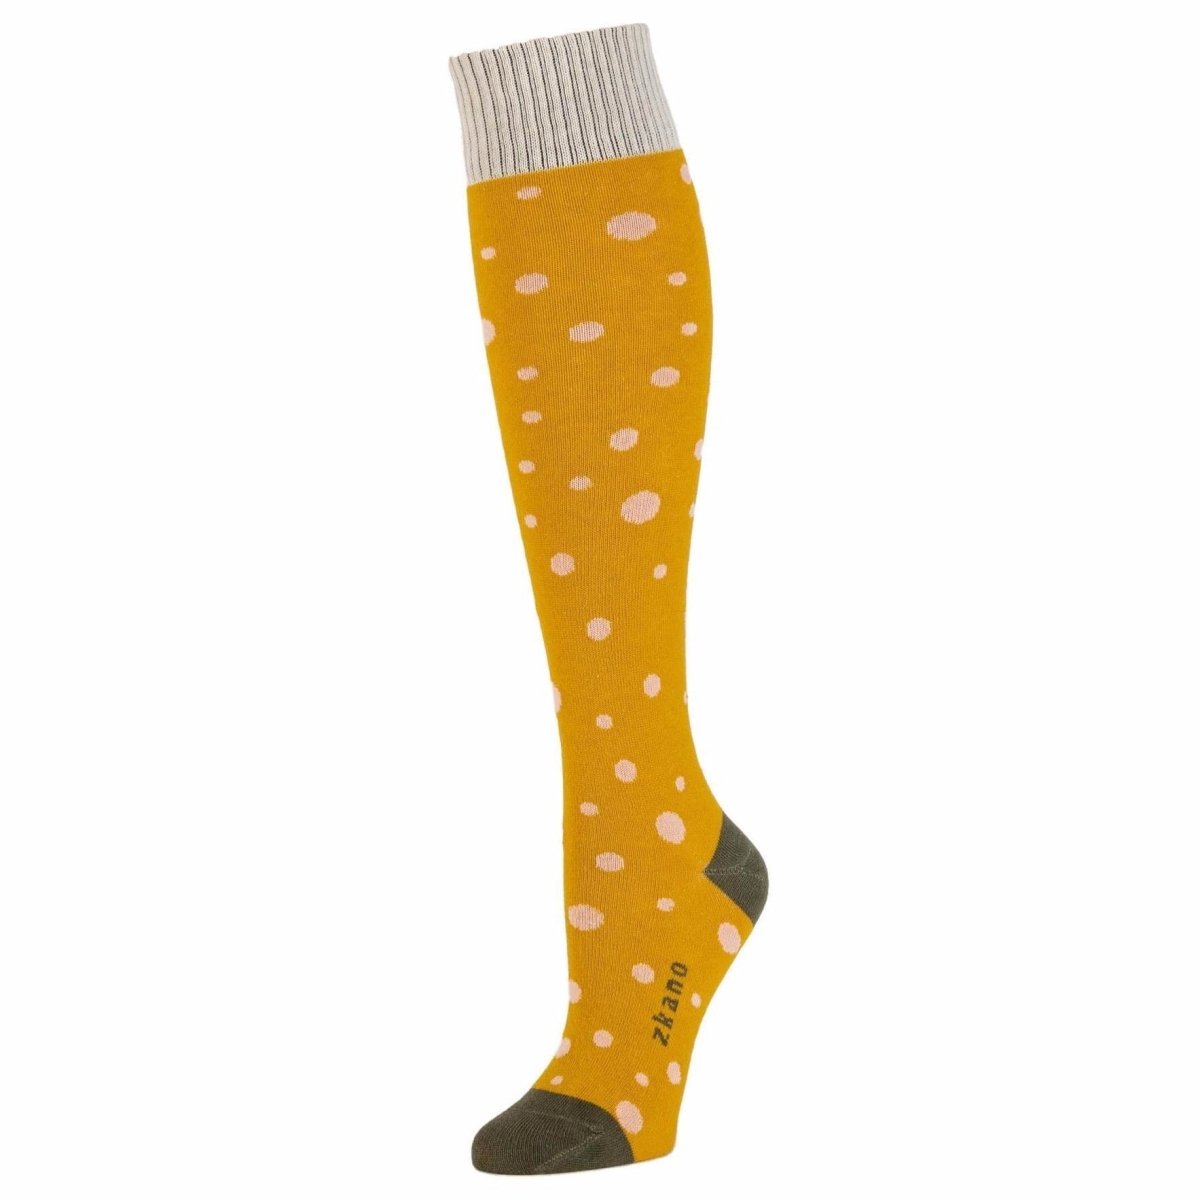 Yellow knee sock with pale pink polka dot pattern and white ribbed collar. Heel and toe are an army green as well as the logo along the arch. The Stella Sock in Harvest Gold is from Zkano and made in Alabama, USA.